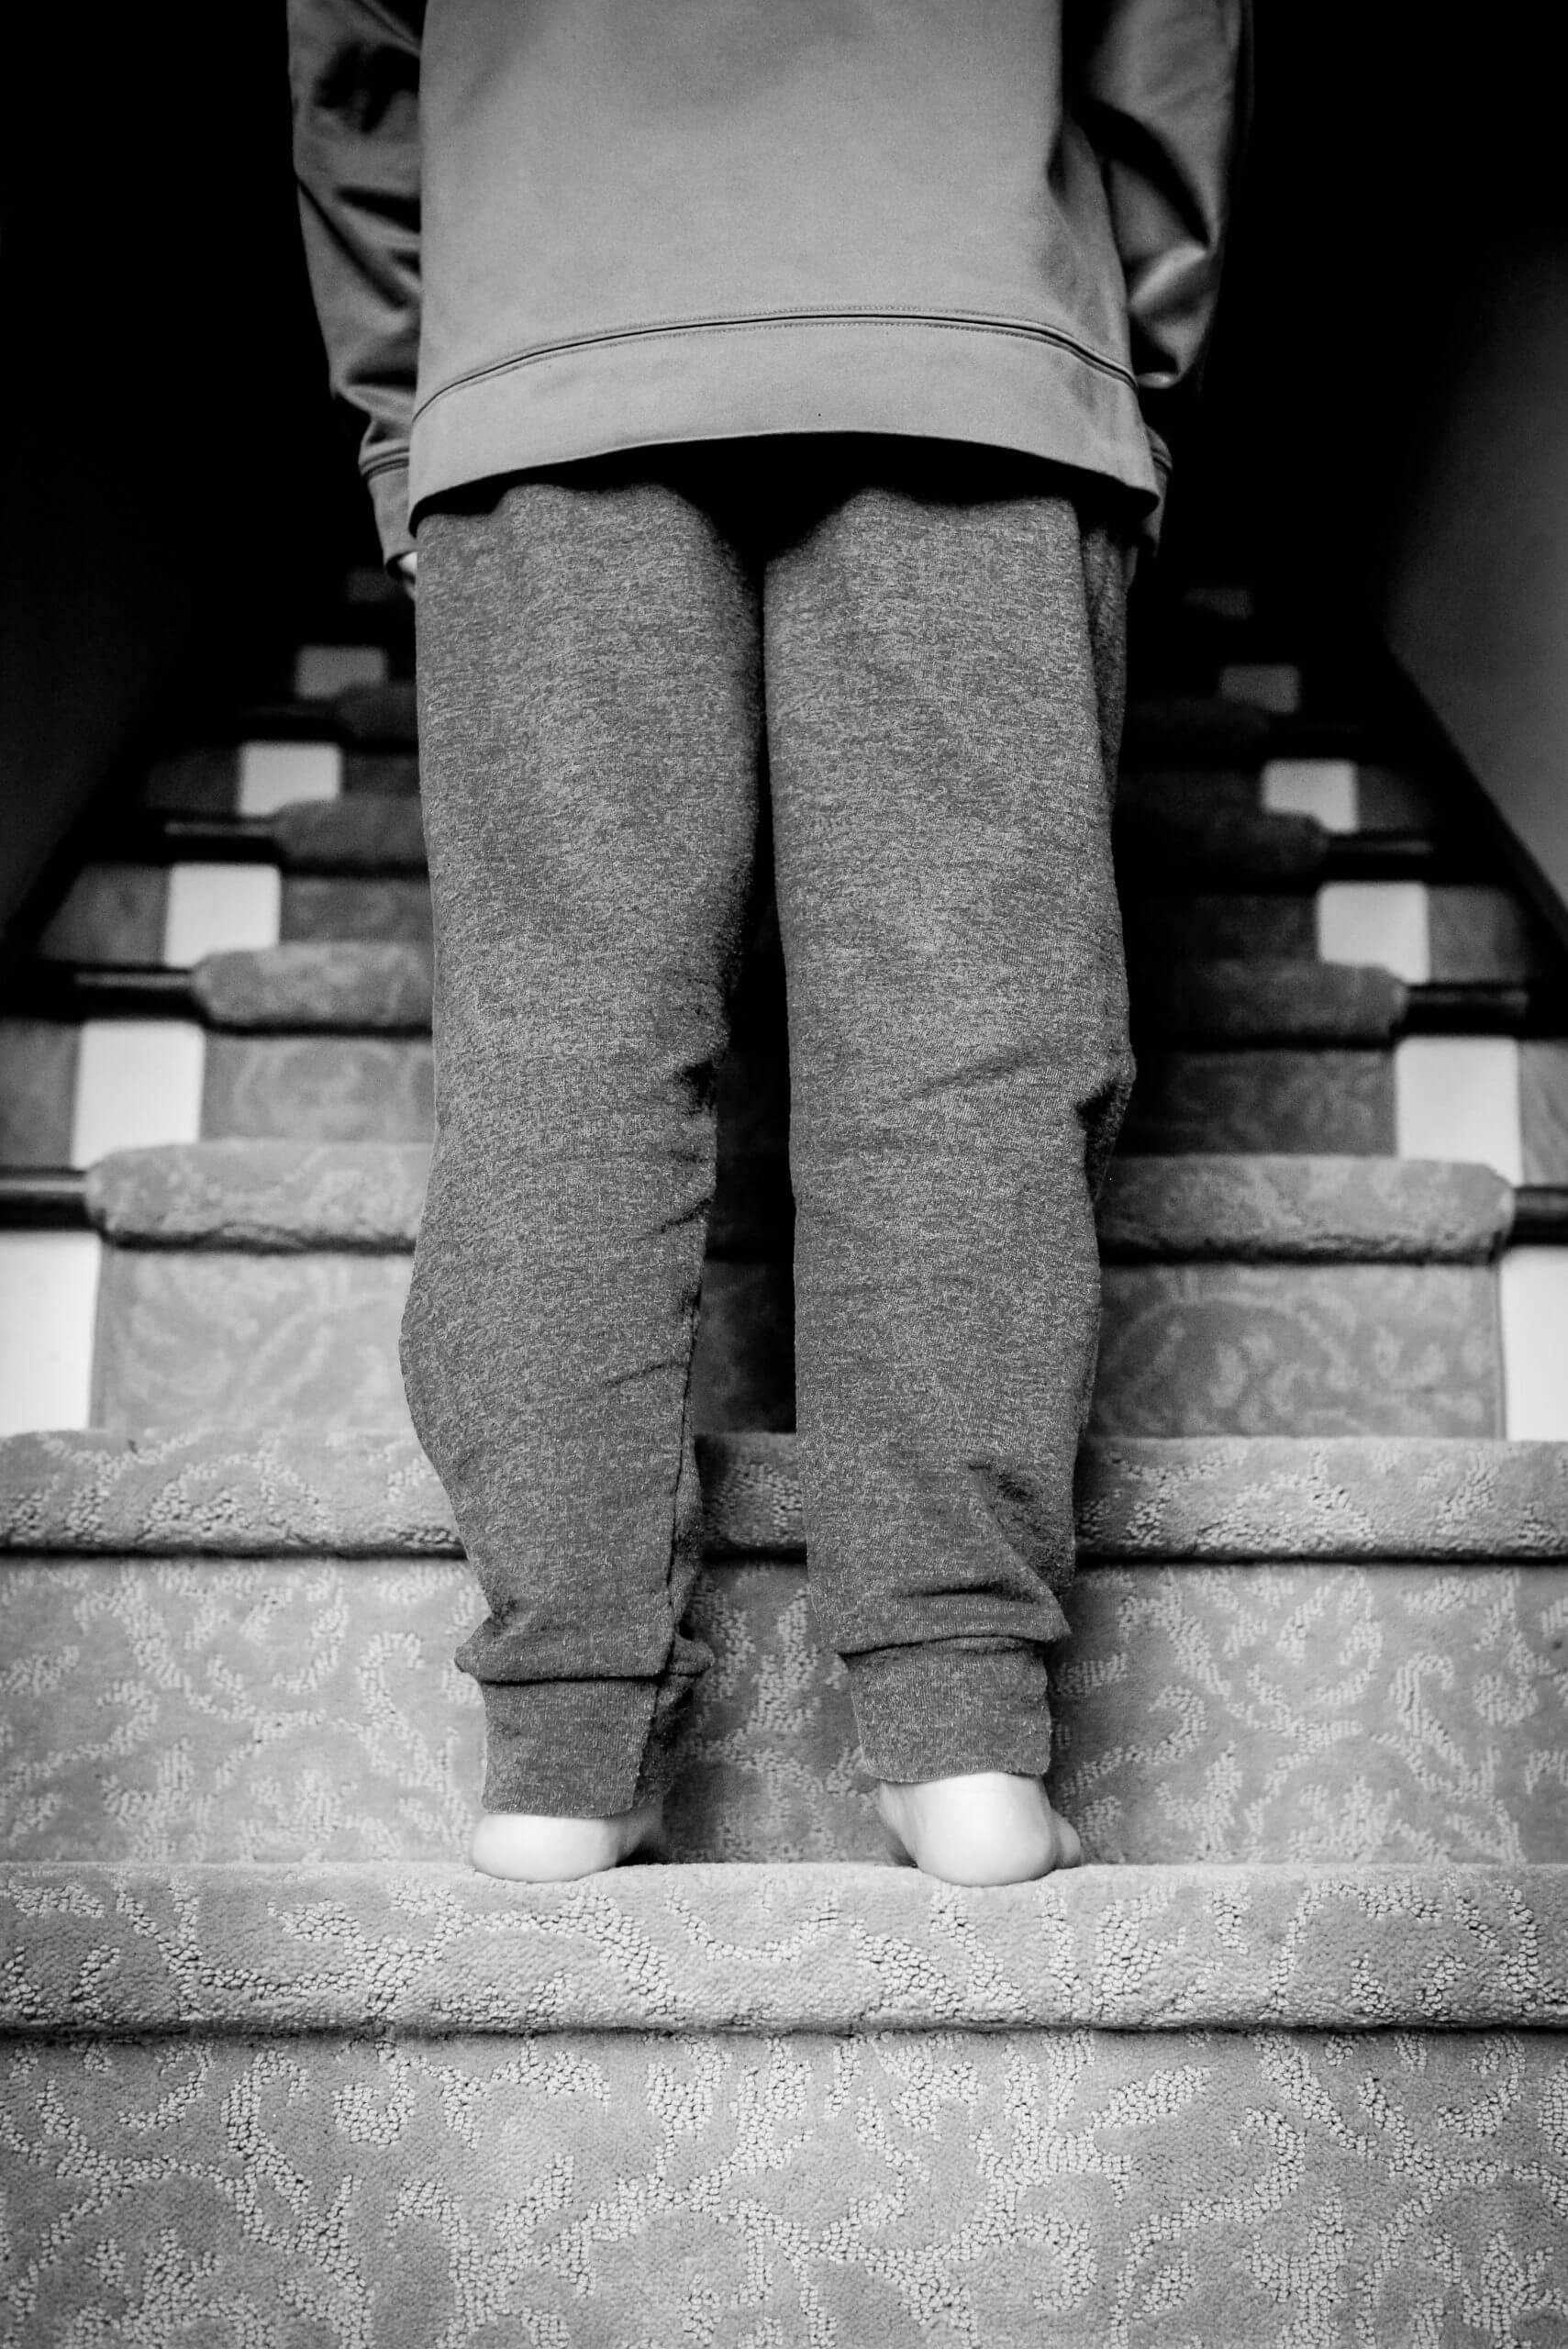 A view looking up from the bottom of the stairs shows a person wearing sweatpants standing on the second step.